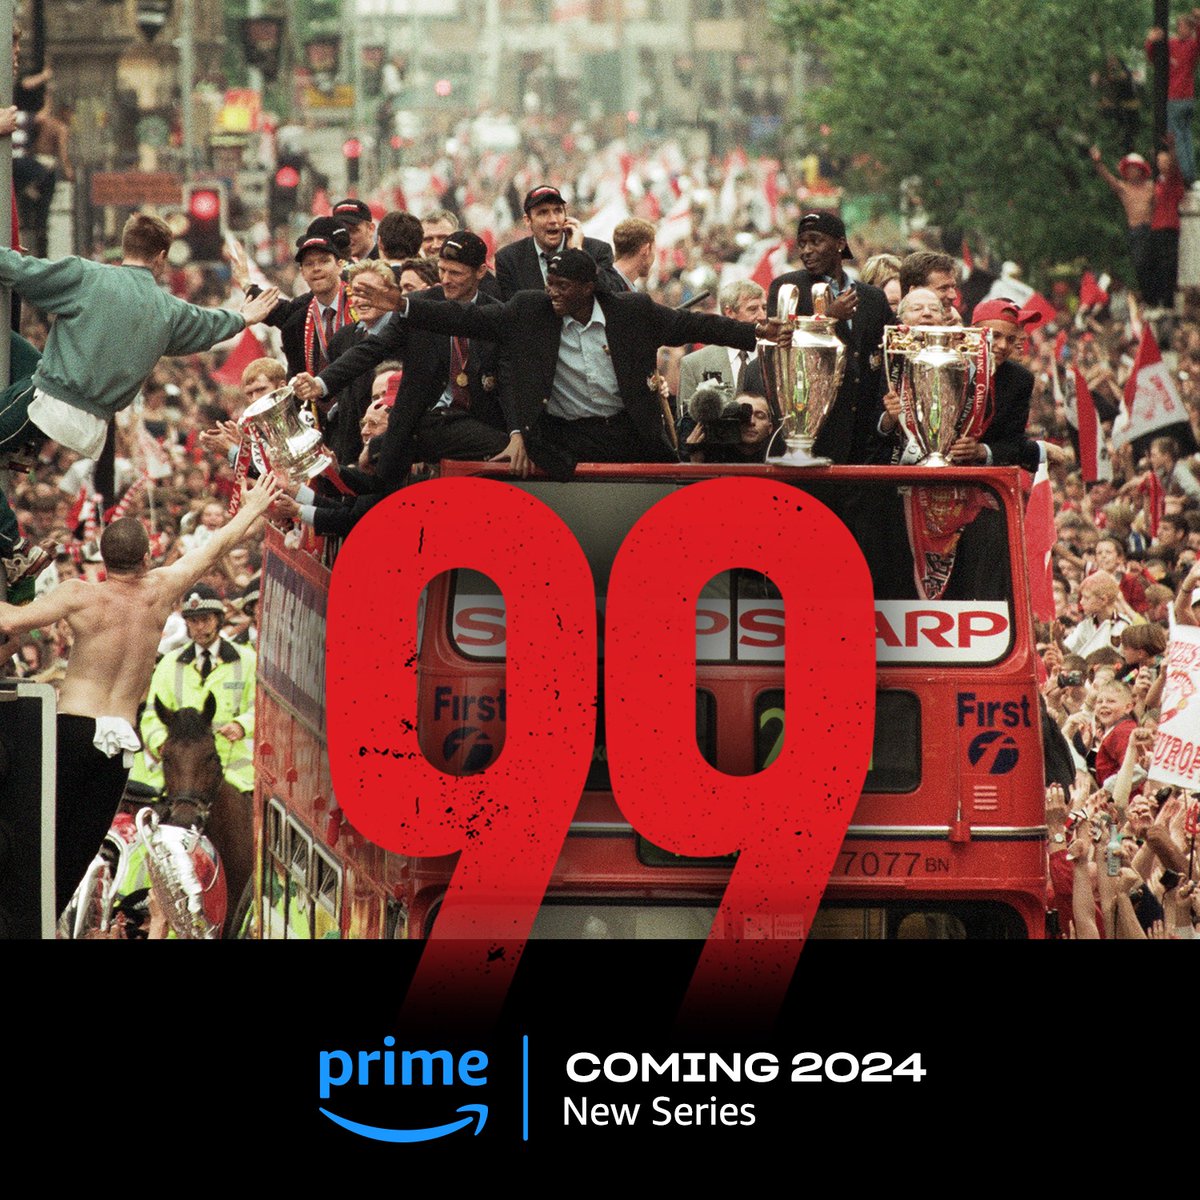 99 | Coming soon to @PrimeVideo in 2024.

Go behind the scenes of @ManUtd's iconic treble-winning season in this era-defining documentary series.

Directed by @sampsoncollins , the RTS-winning director of Gazza, and co-produced by Buzz 16, Studio 99 and @Venture_land.